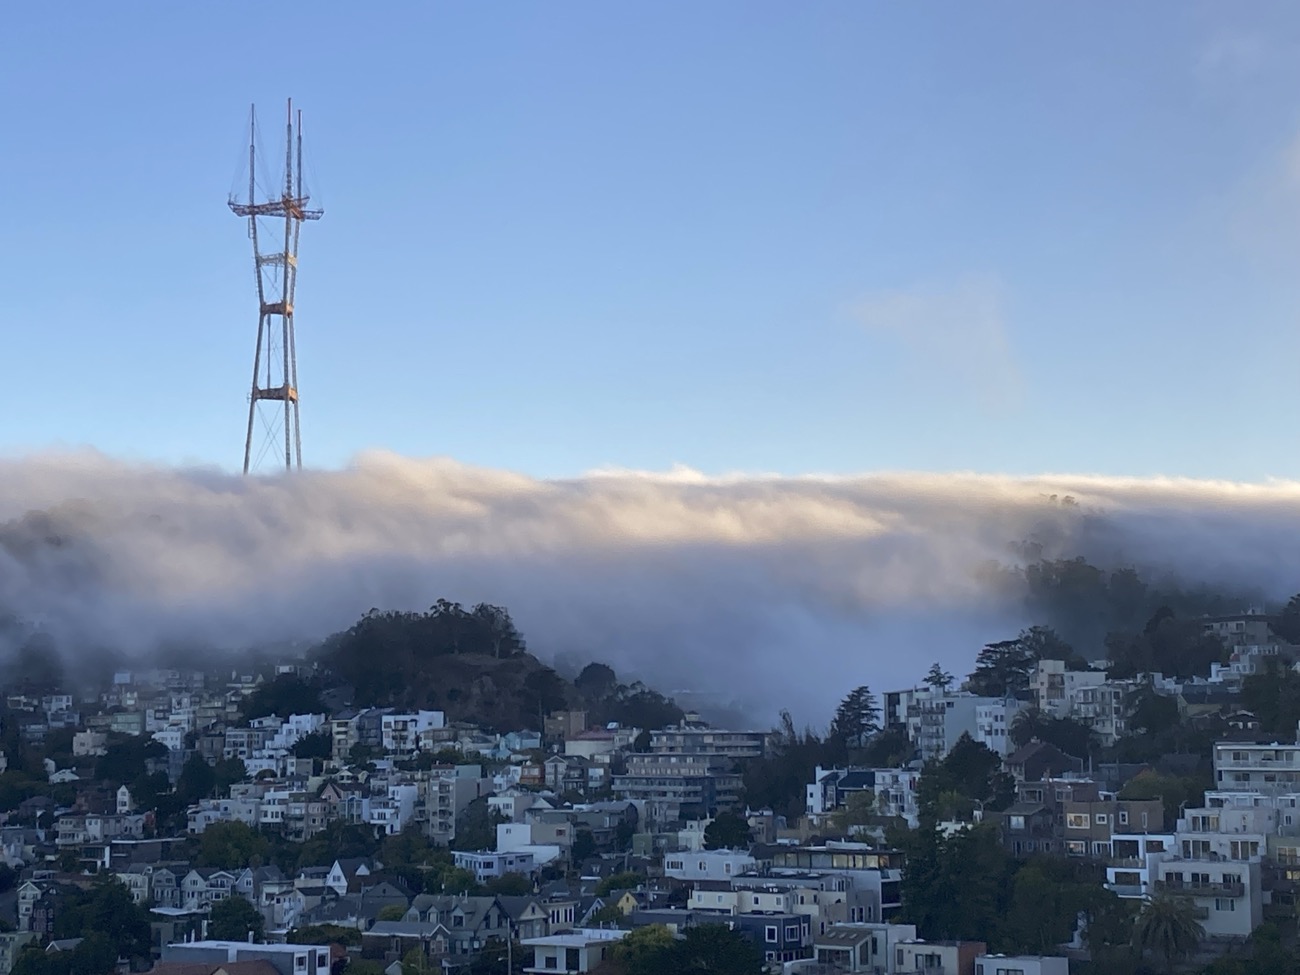 Sutro Tower stands above a blanket of fog. Seen from Corona Heights during an afternoon run.